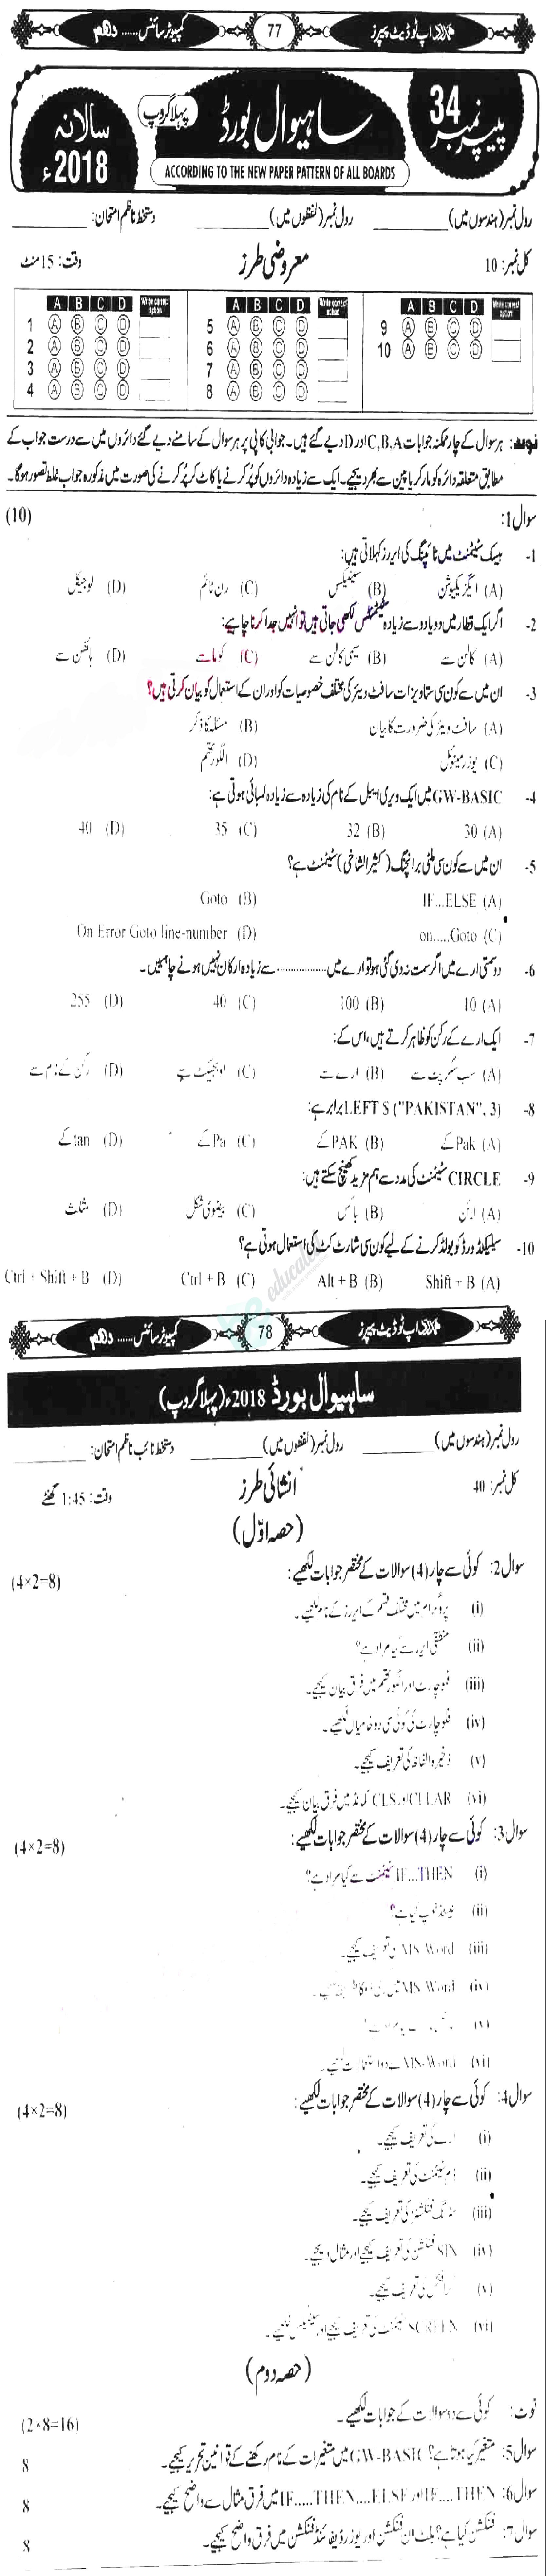 Computer Science 10th class Past Paper Group 1 BISE Sahiwal 2018